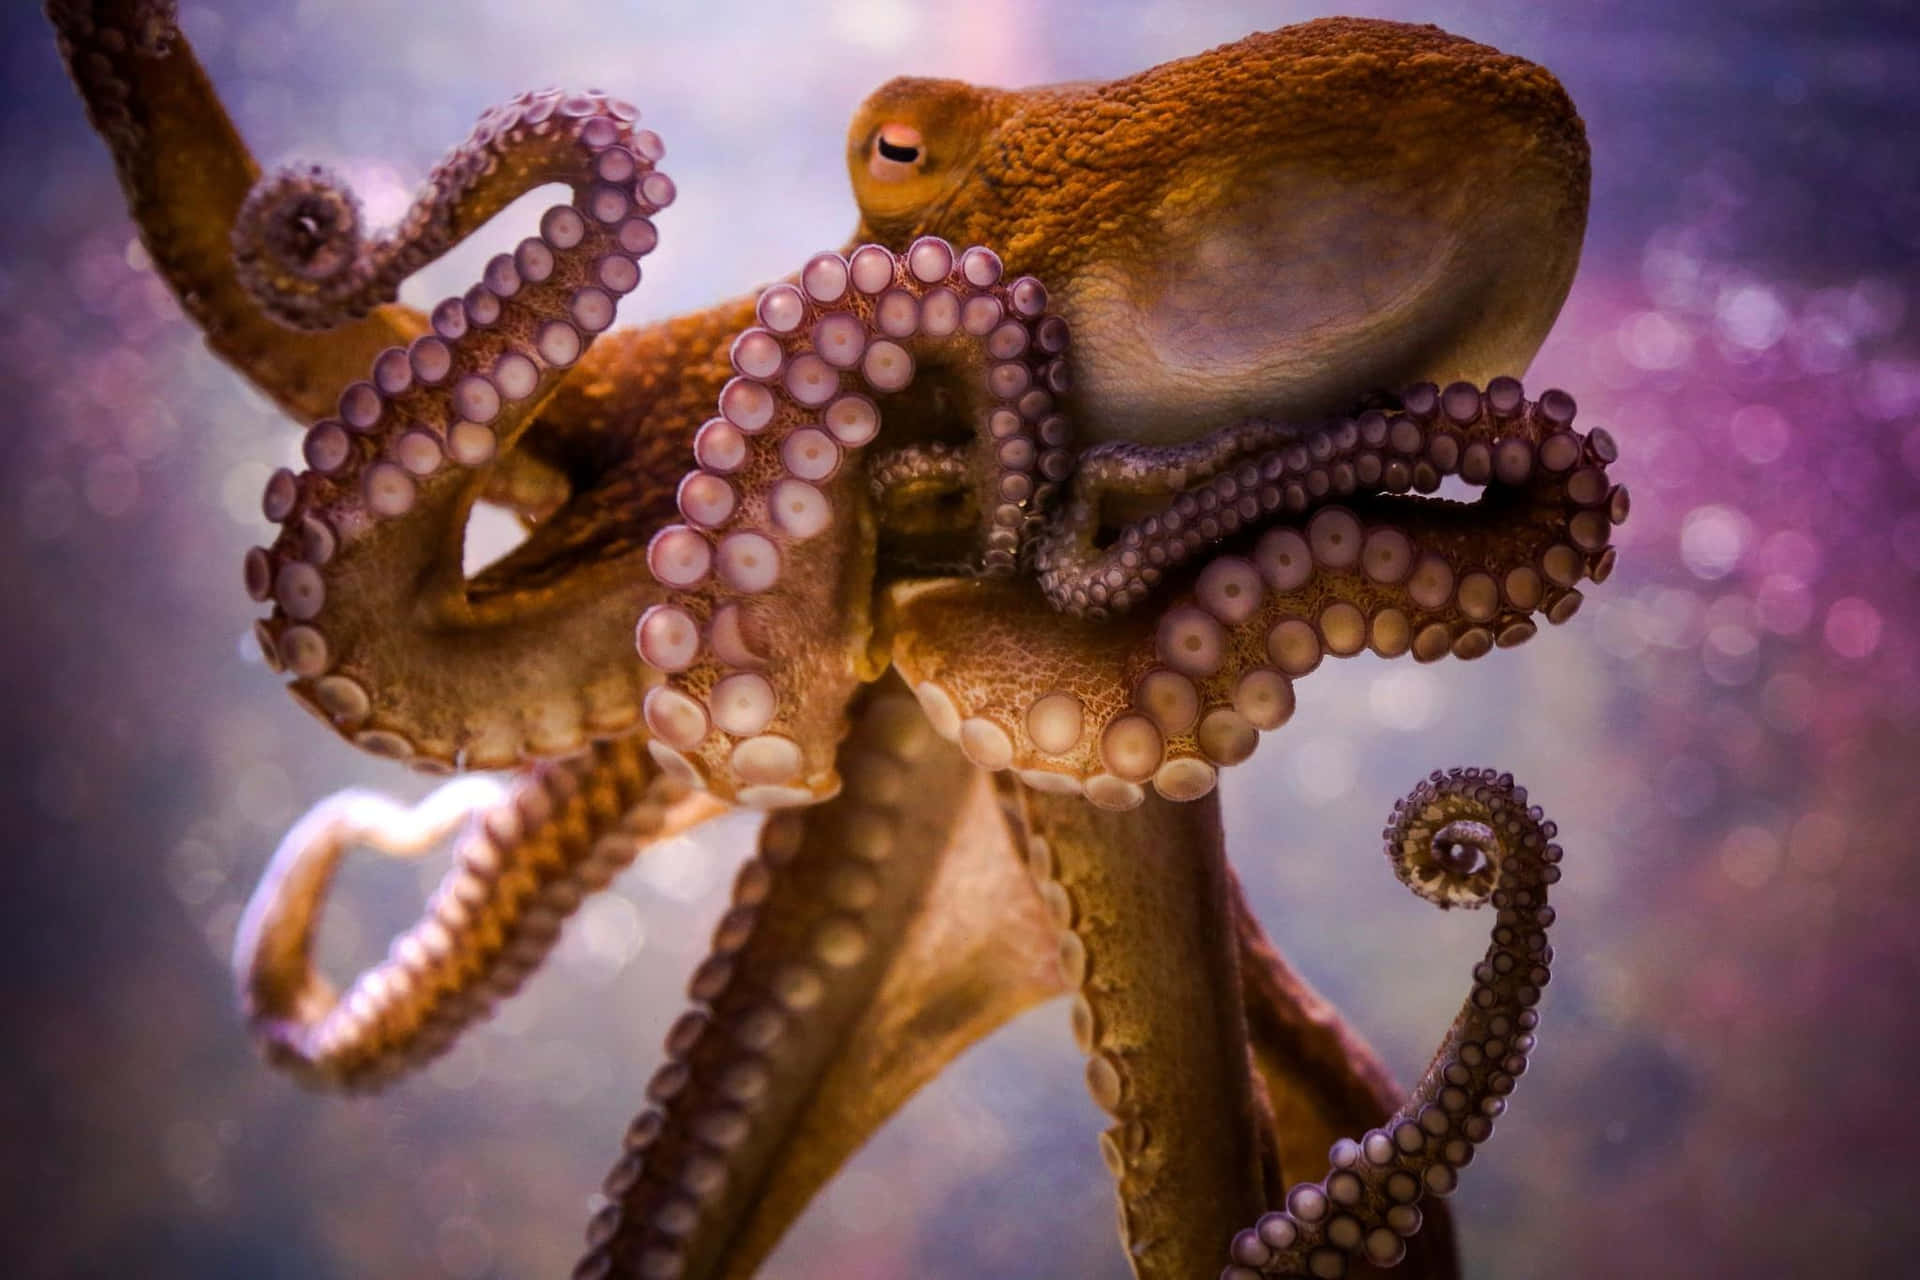 An Octopus at the Bottom of the Sea